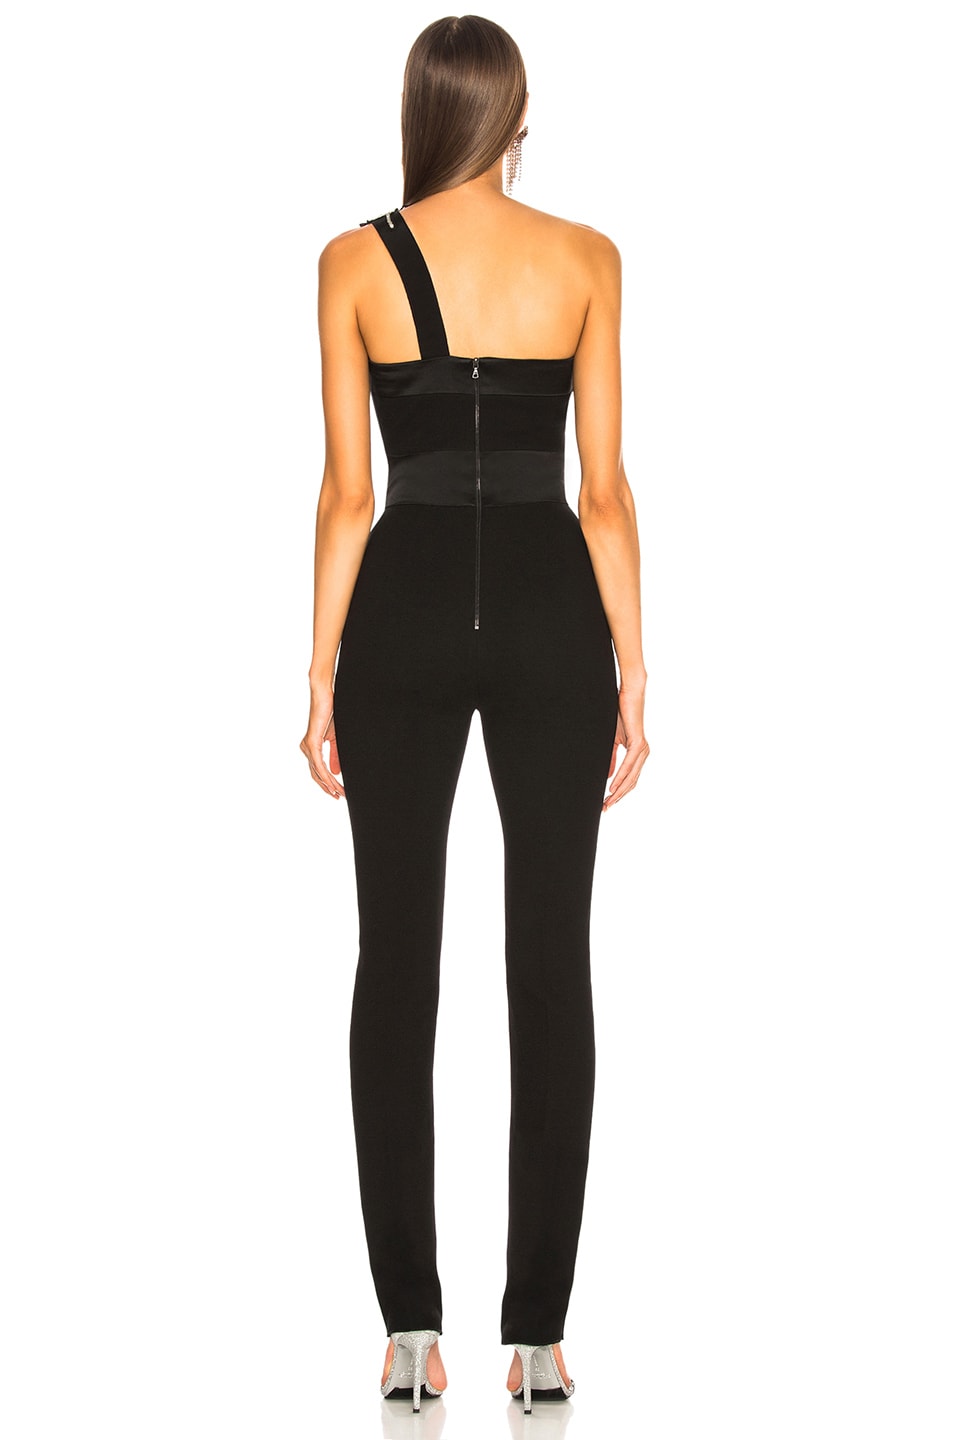 David Koma Embroidered Jumpsuit in Black & Silver | FWRD